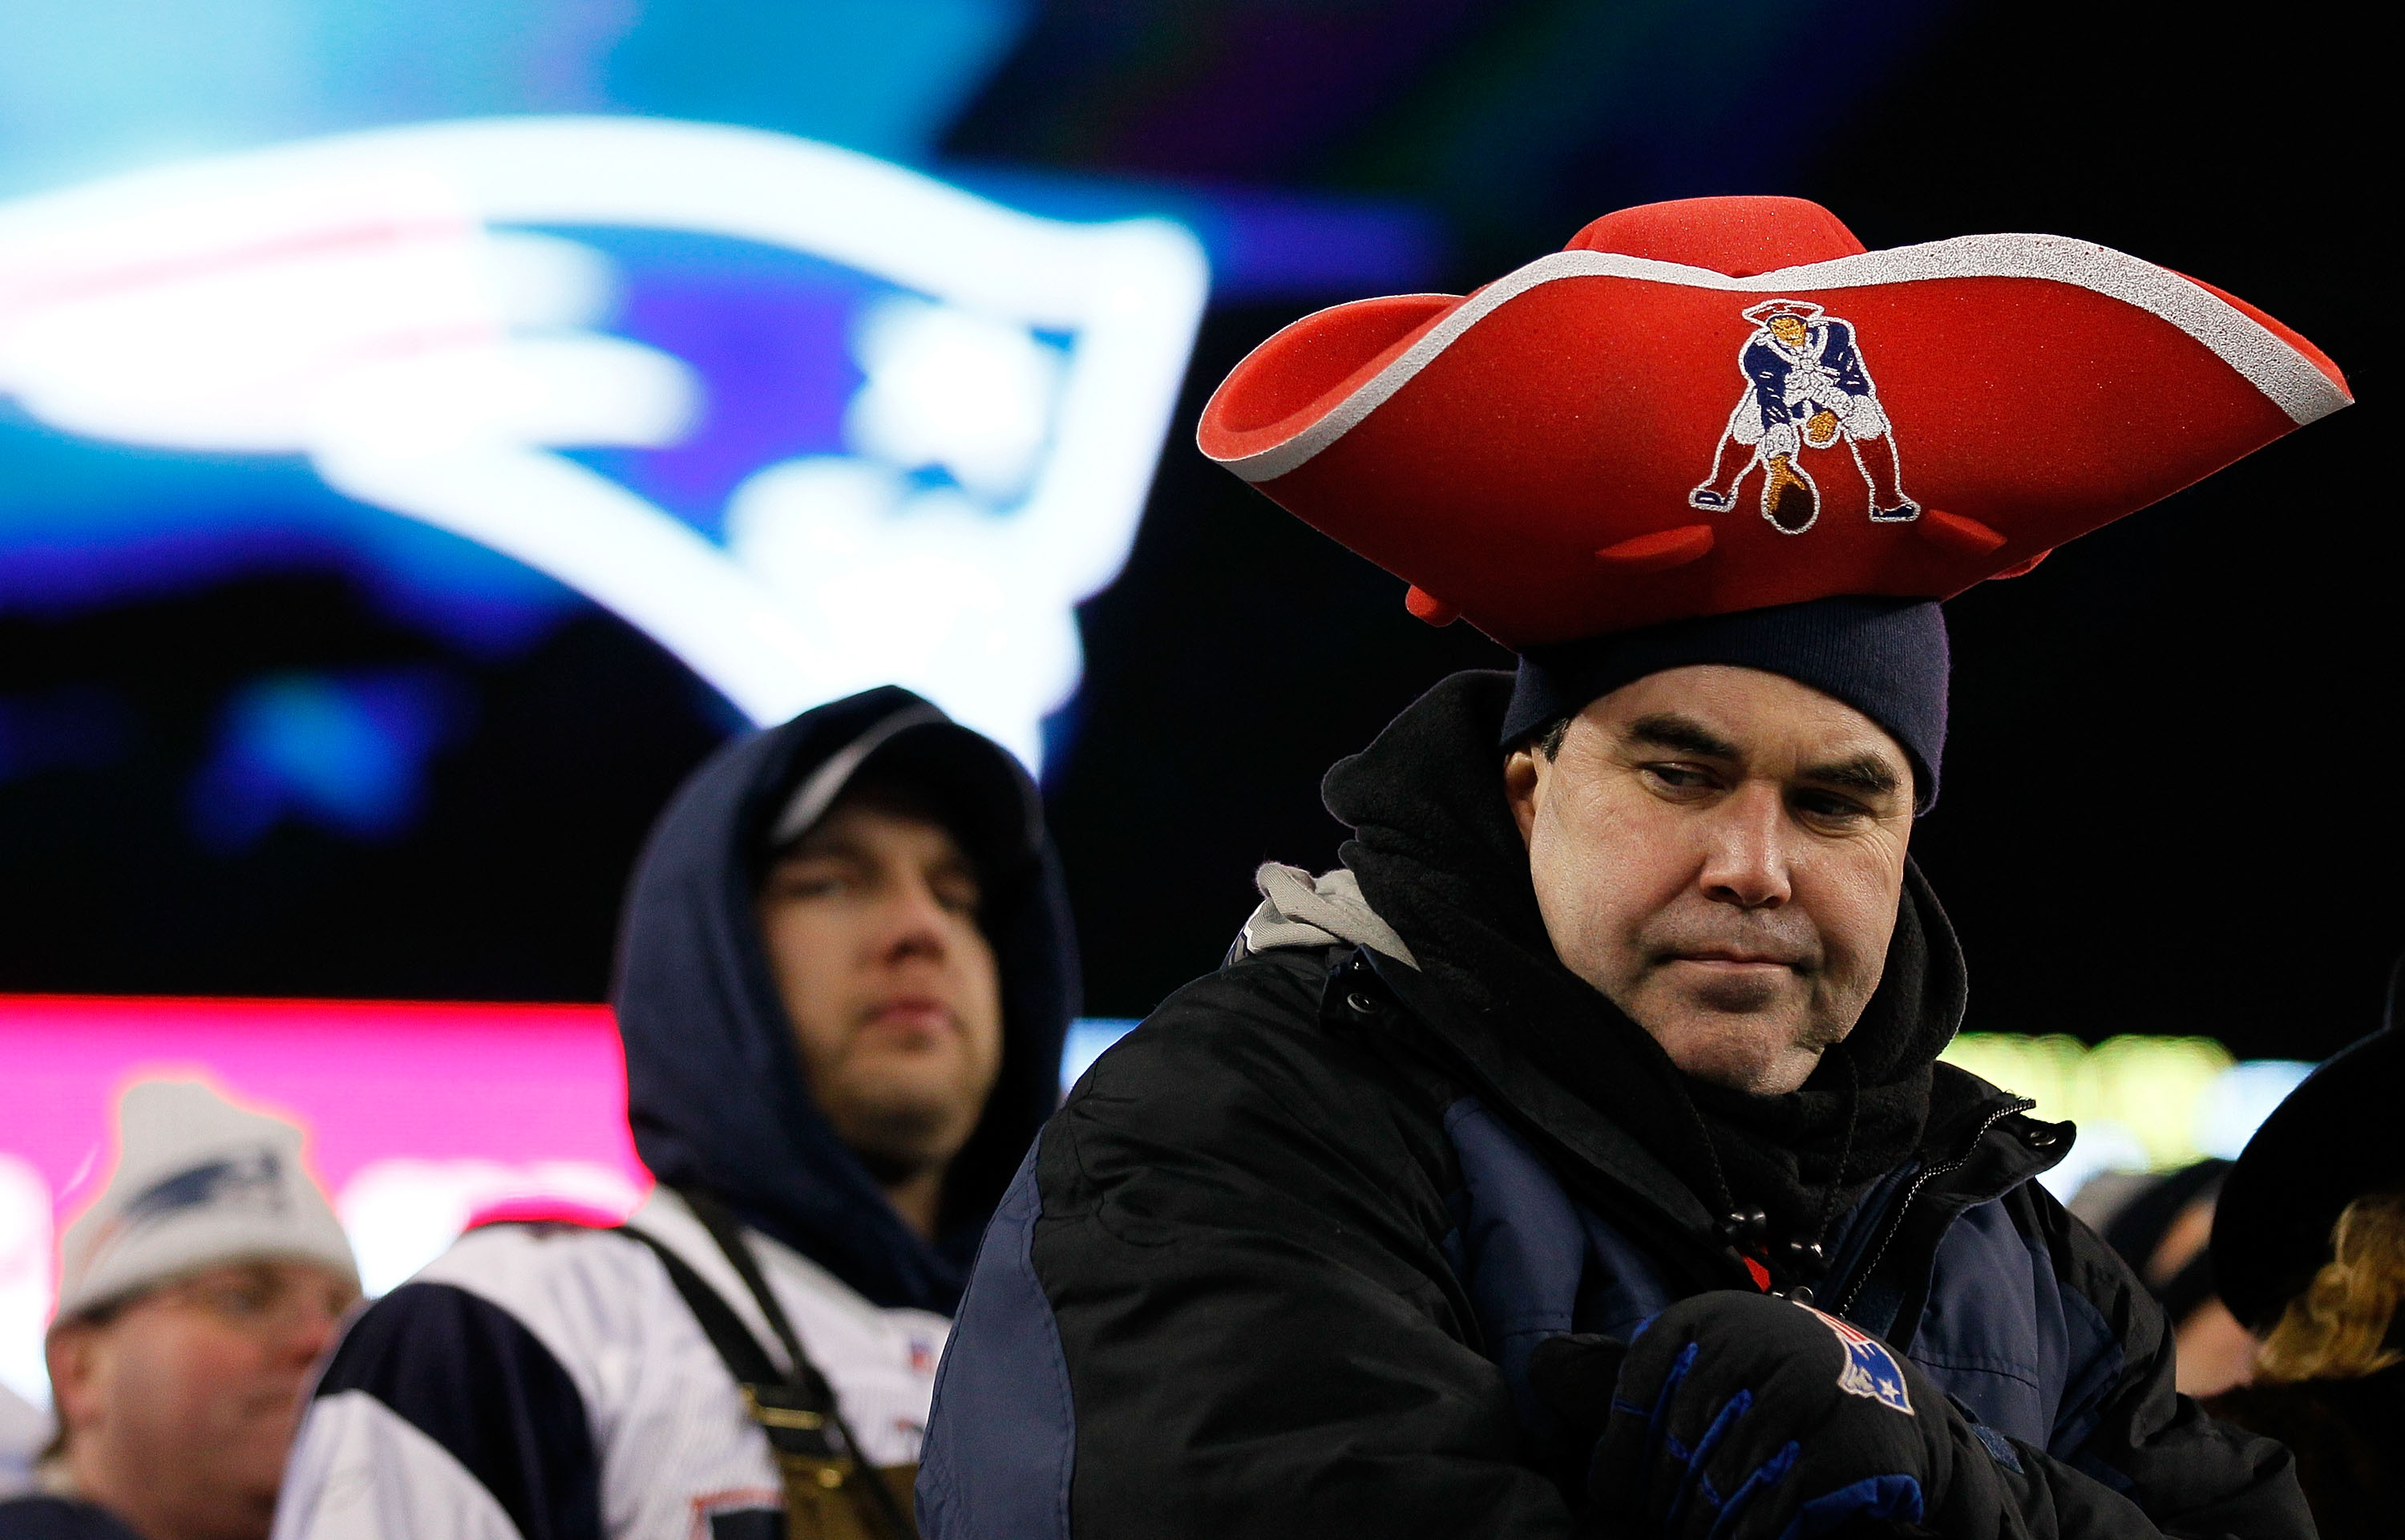 FOXBORO, MA - JANUARY 16:  A fan of the New England Patriots looks on after the Jets defeated the Patriots 28 to 21 in their 2011 AFC divisional playoff game at Gillette Stadium on January 16, 2011 in Foxboro, Massachusetts.  (Photo by Jim Rogash/Getty Im